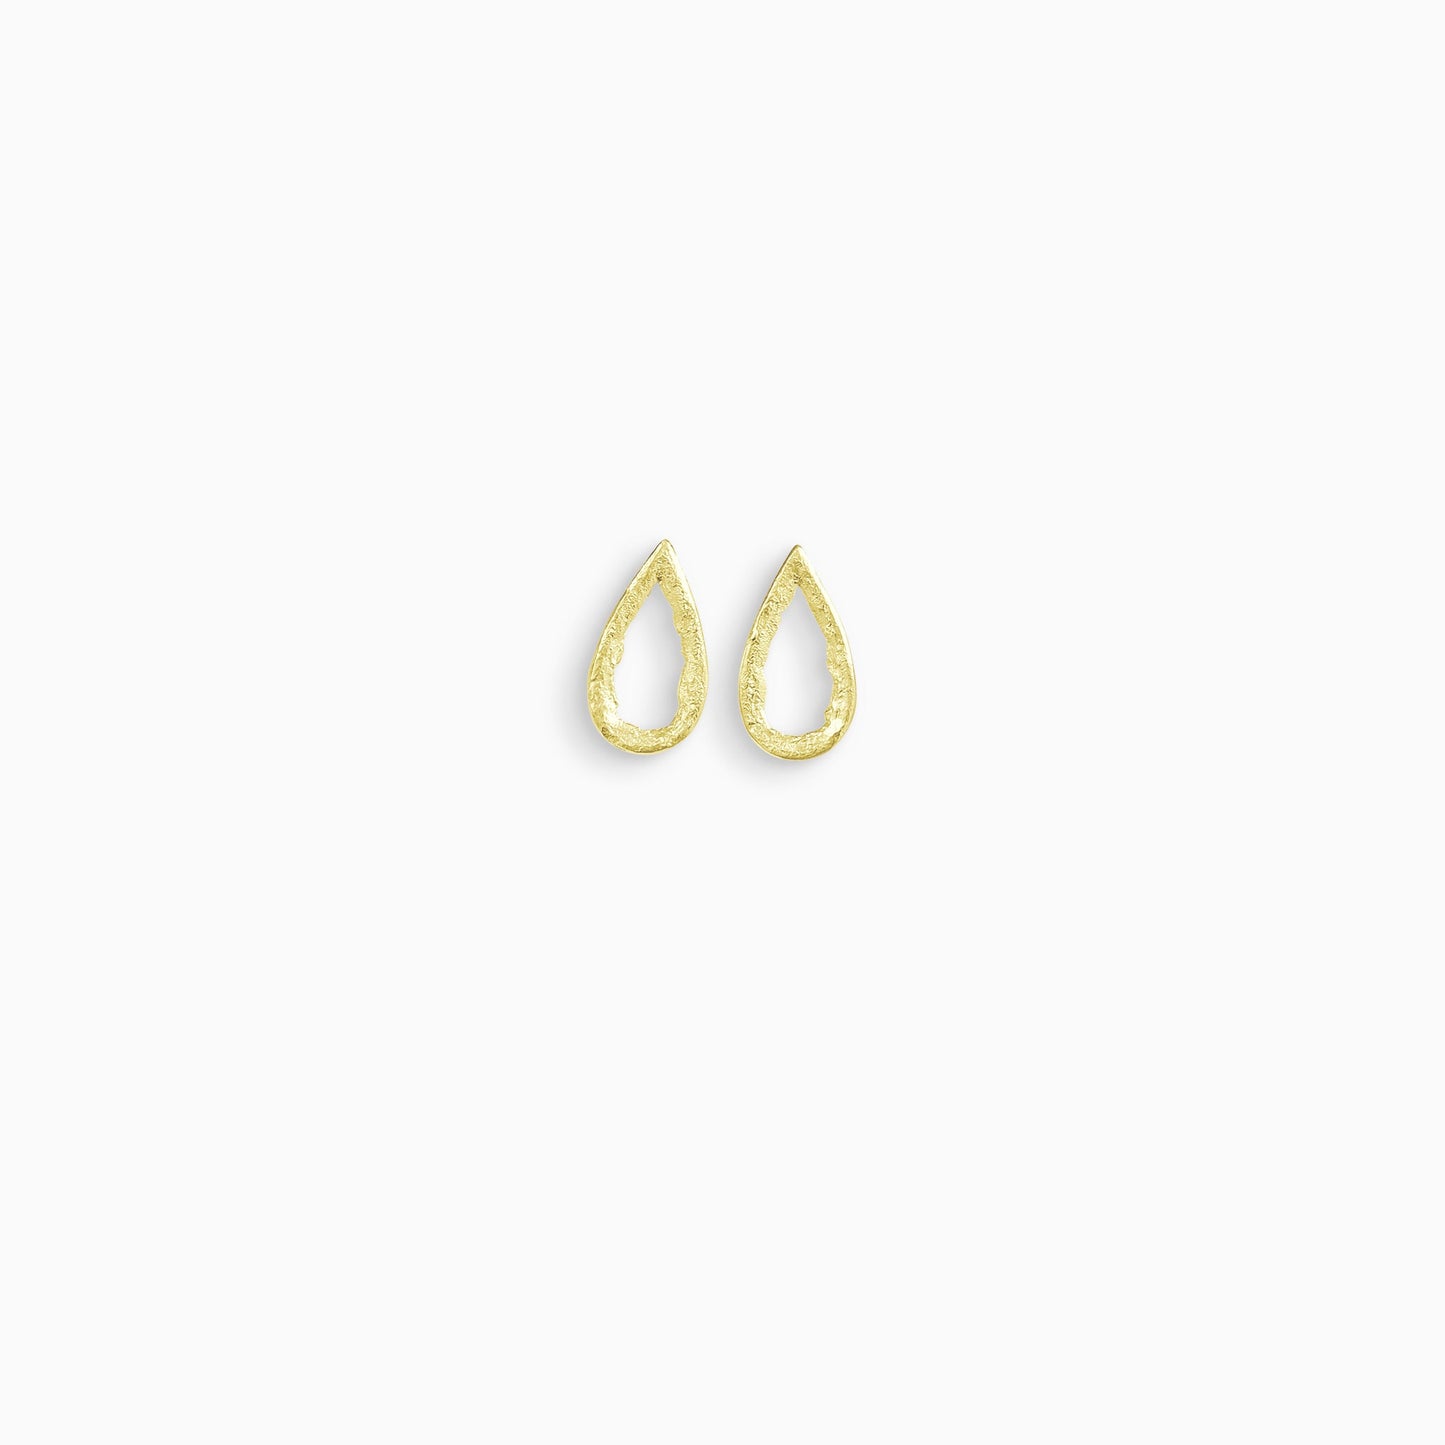 A pair of 18ct Fairtrade yellow gold stud earrings, teardrop in form with an open centre. Strong organic texture. Smooth outside edge, fragmented inside edges. 19mm x 10mm 